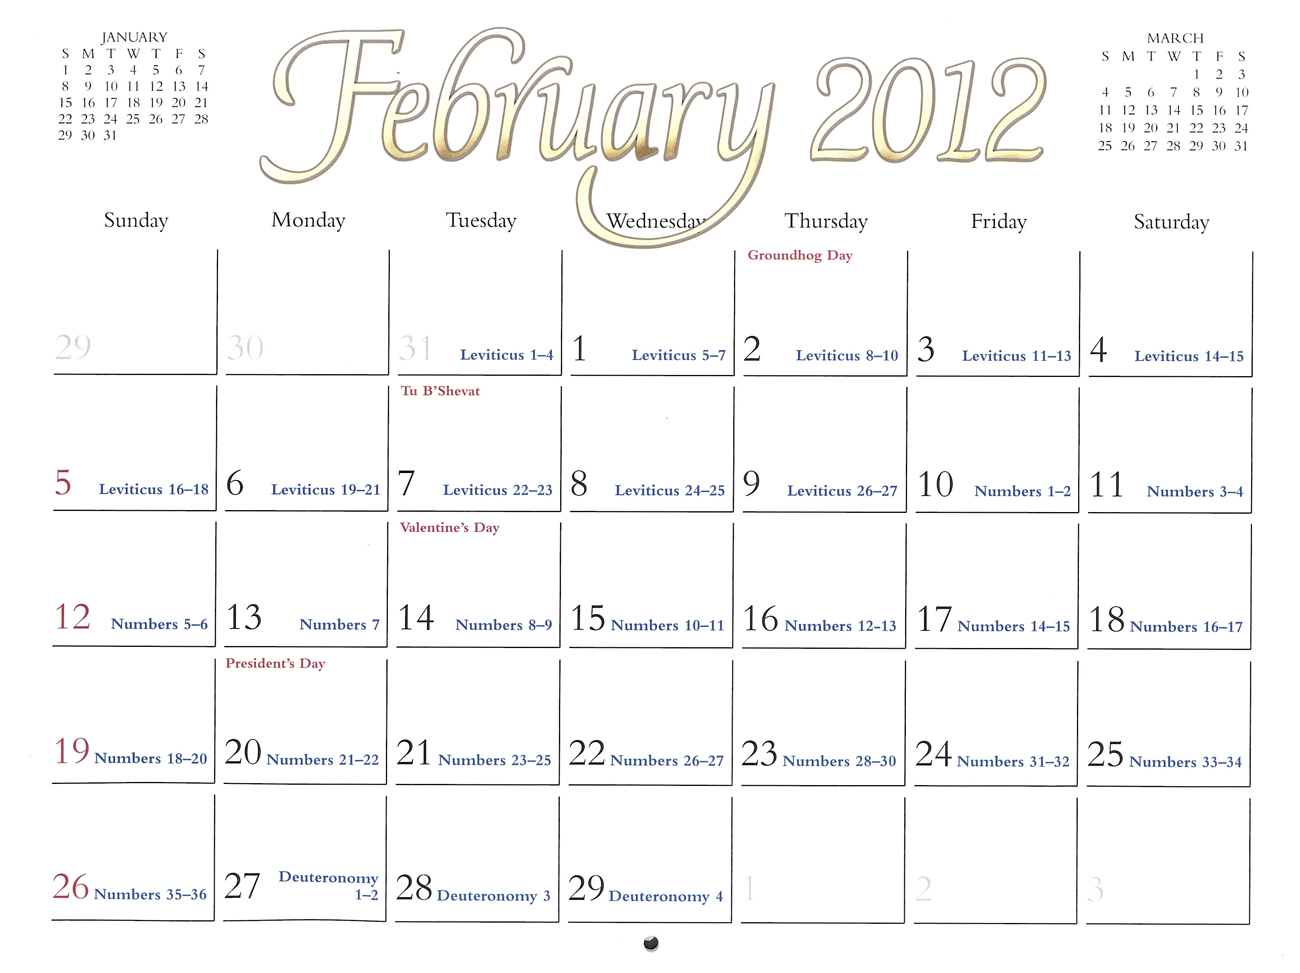 2012 Prophecy Calendar: February - Paul's First Letter to the Chuirch at Corinth